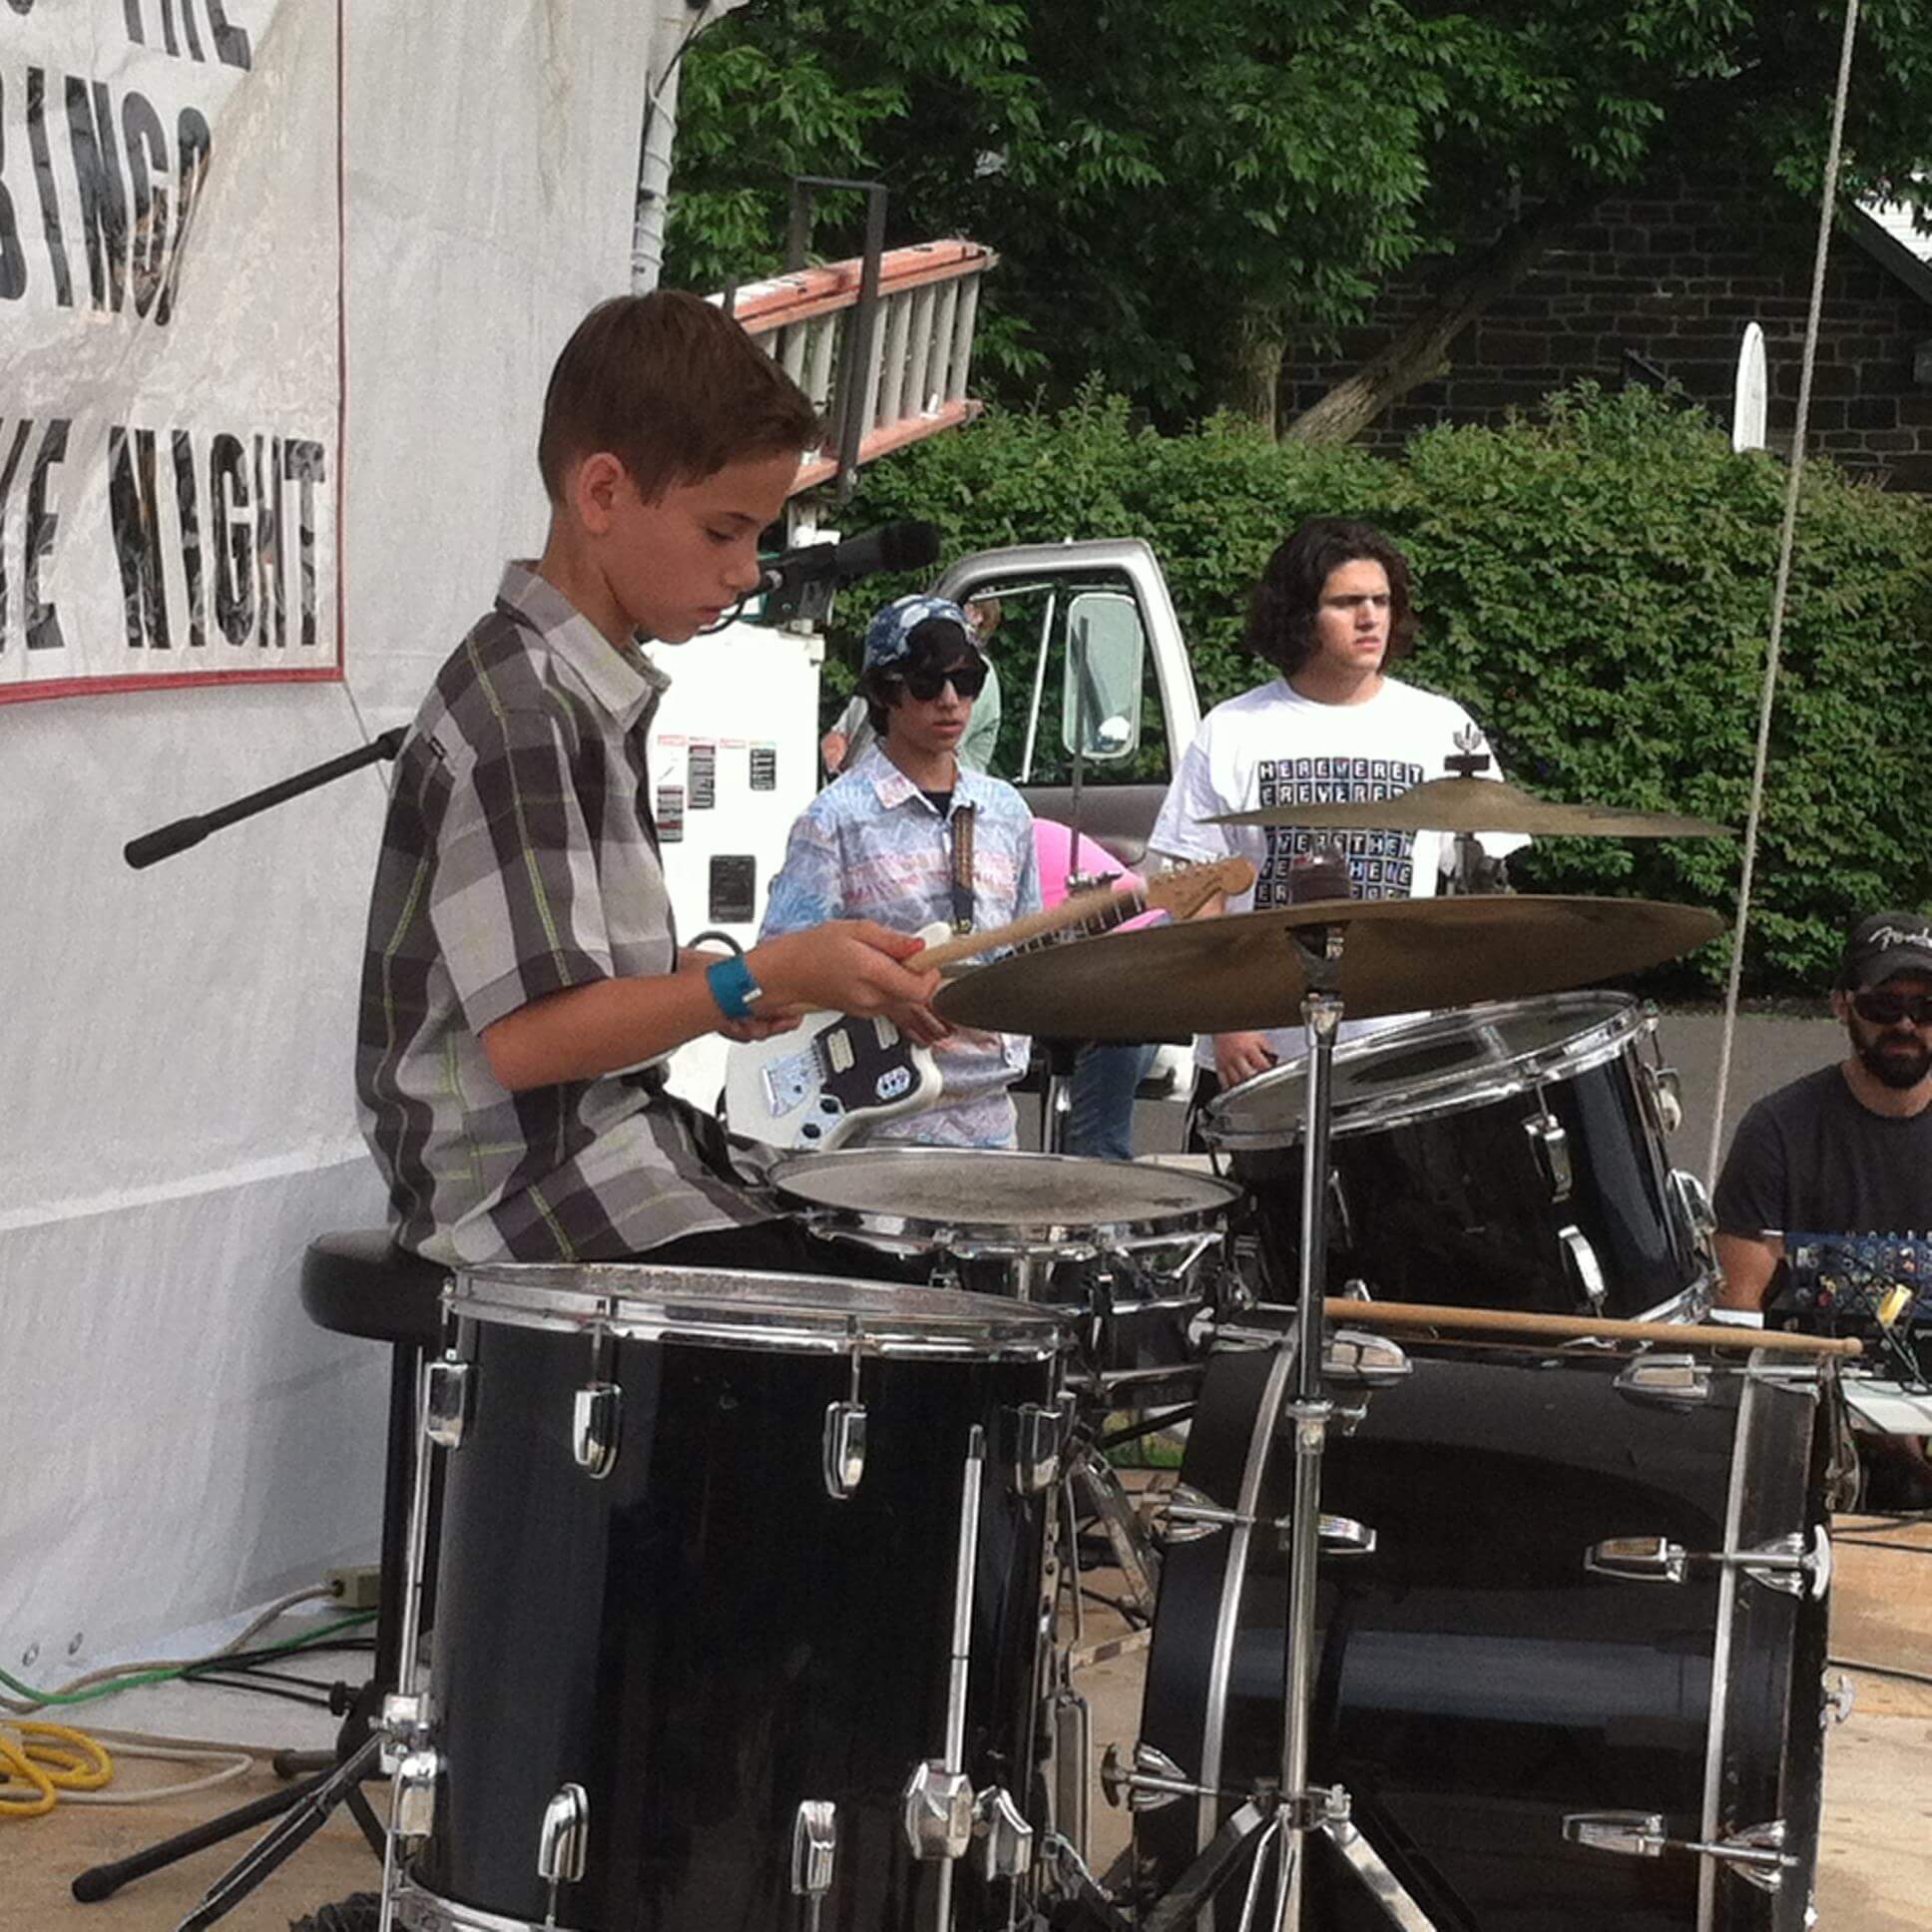 Students of School of Rock Doylestown's Performance Program play live music at local venues, just like real rockstars!